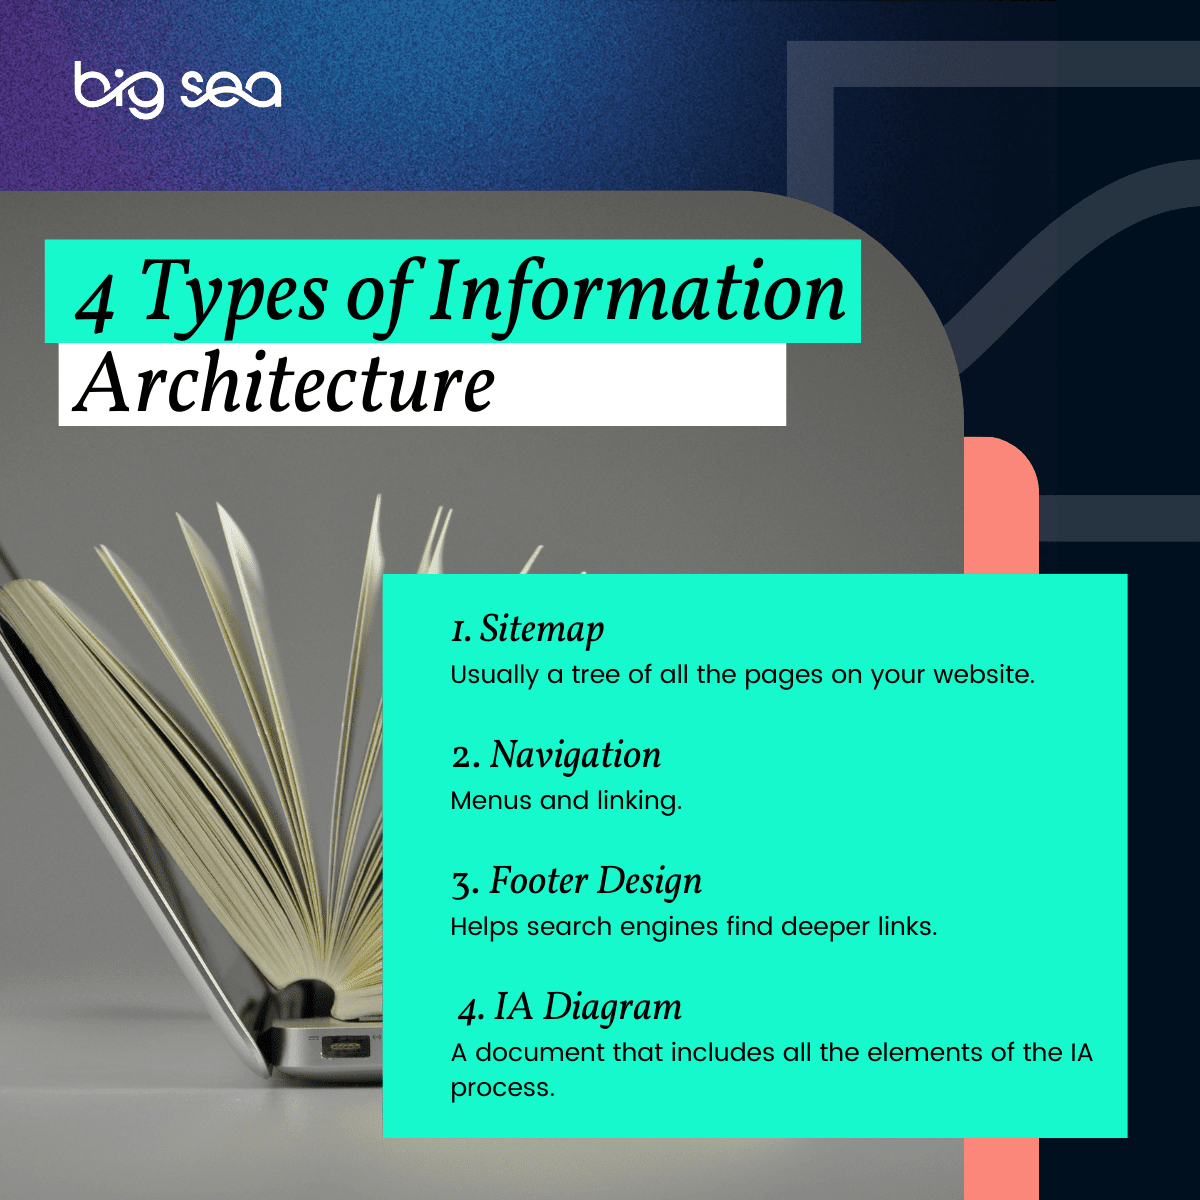 brief list of the four types of information architecture mentioned in the article